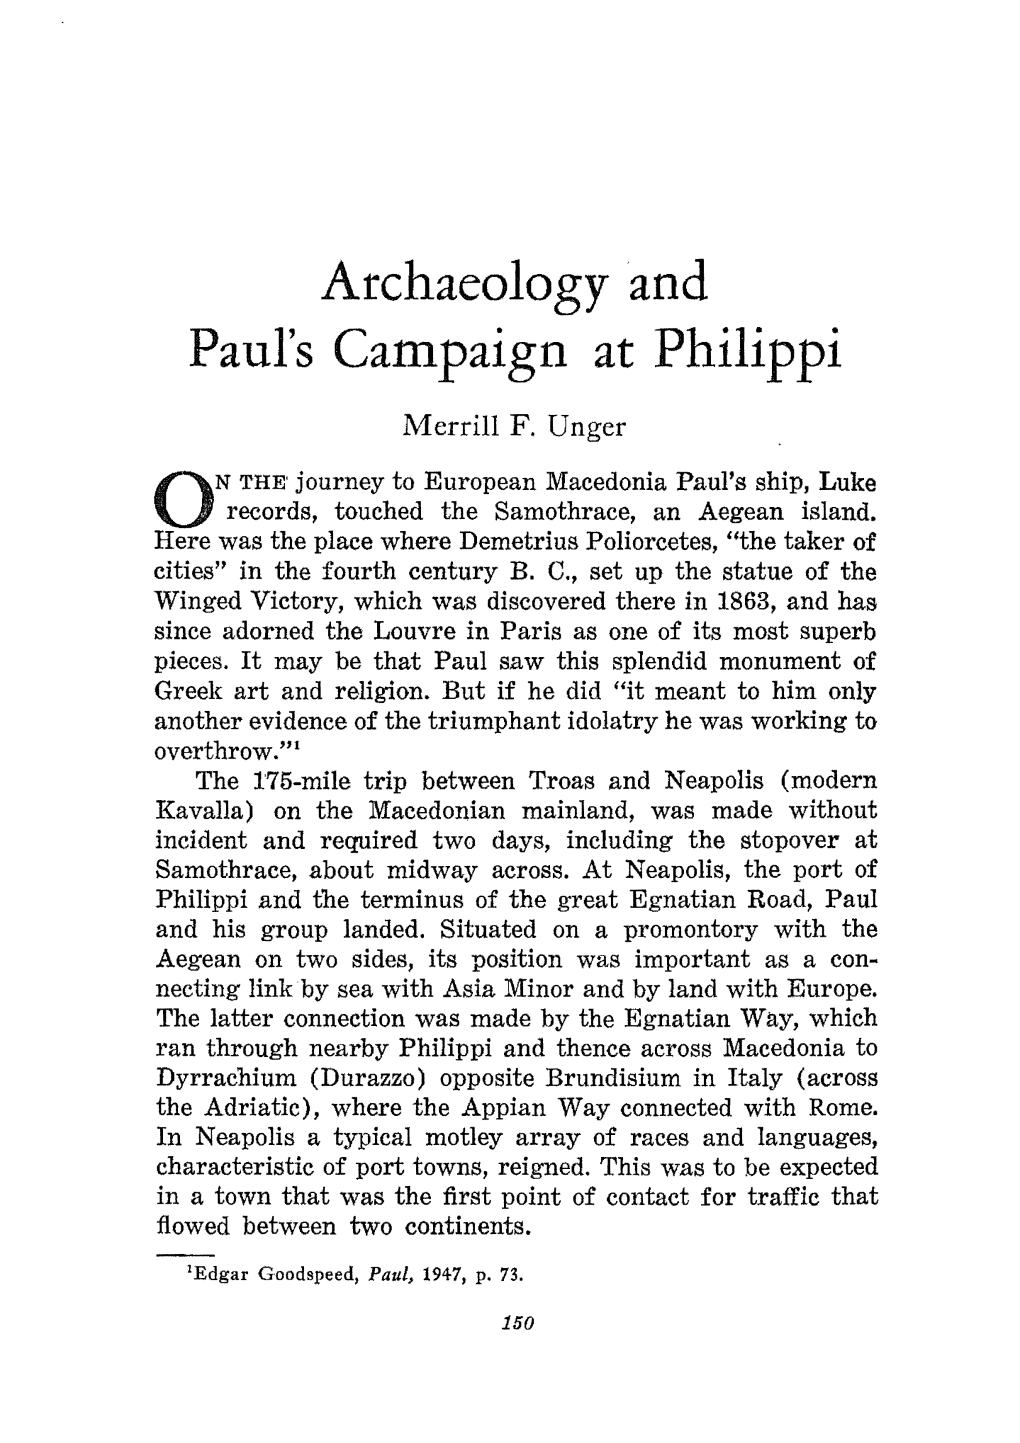 Merrill F. Unger, "Archaeology and Paul's Campaign at Philippi,"